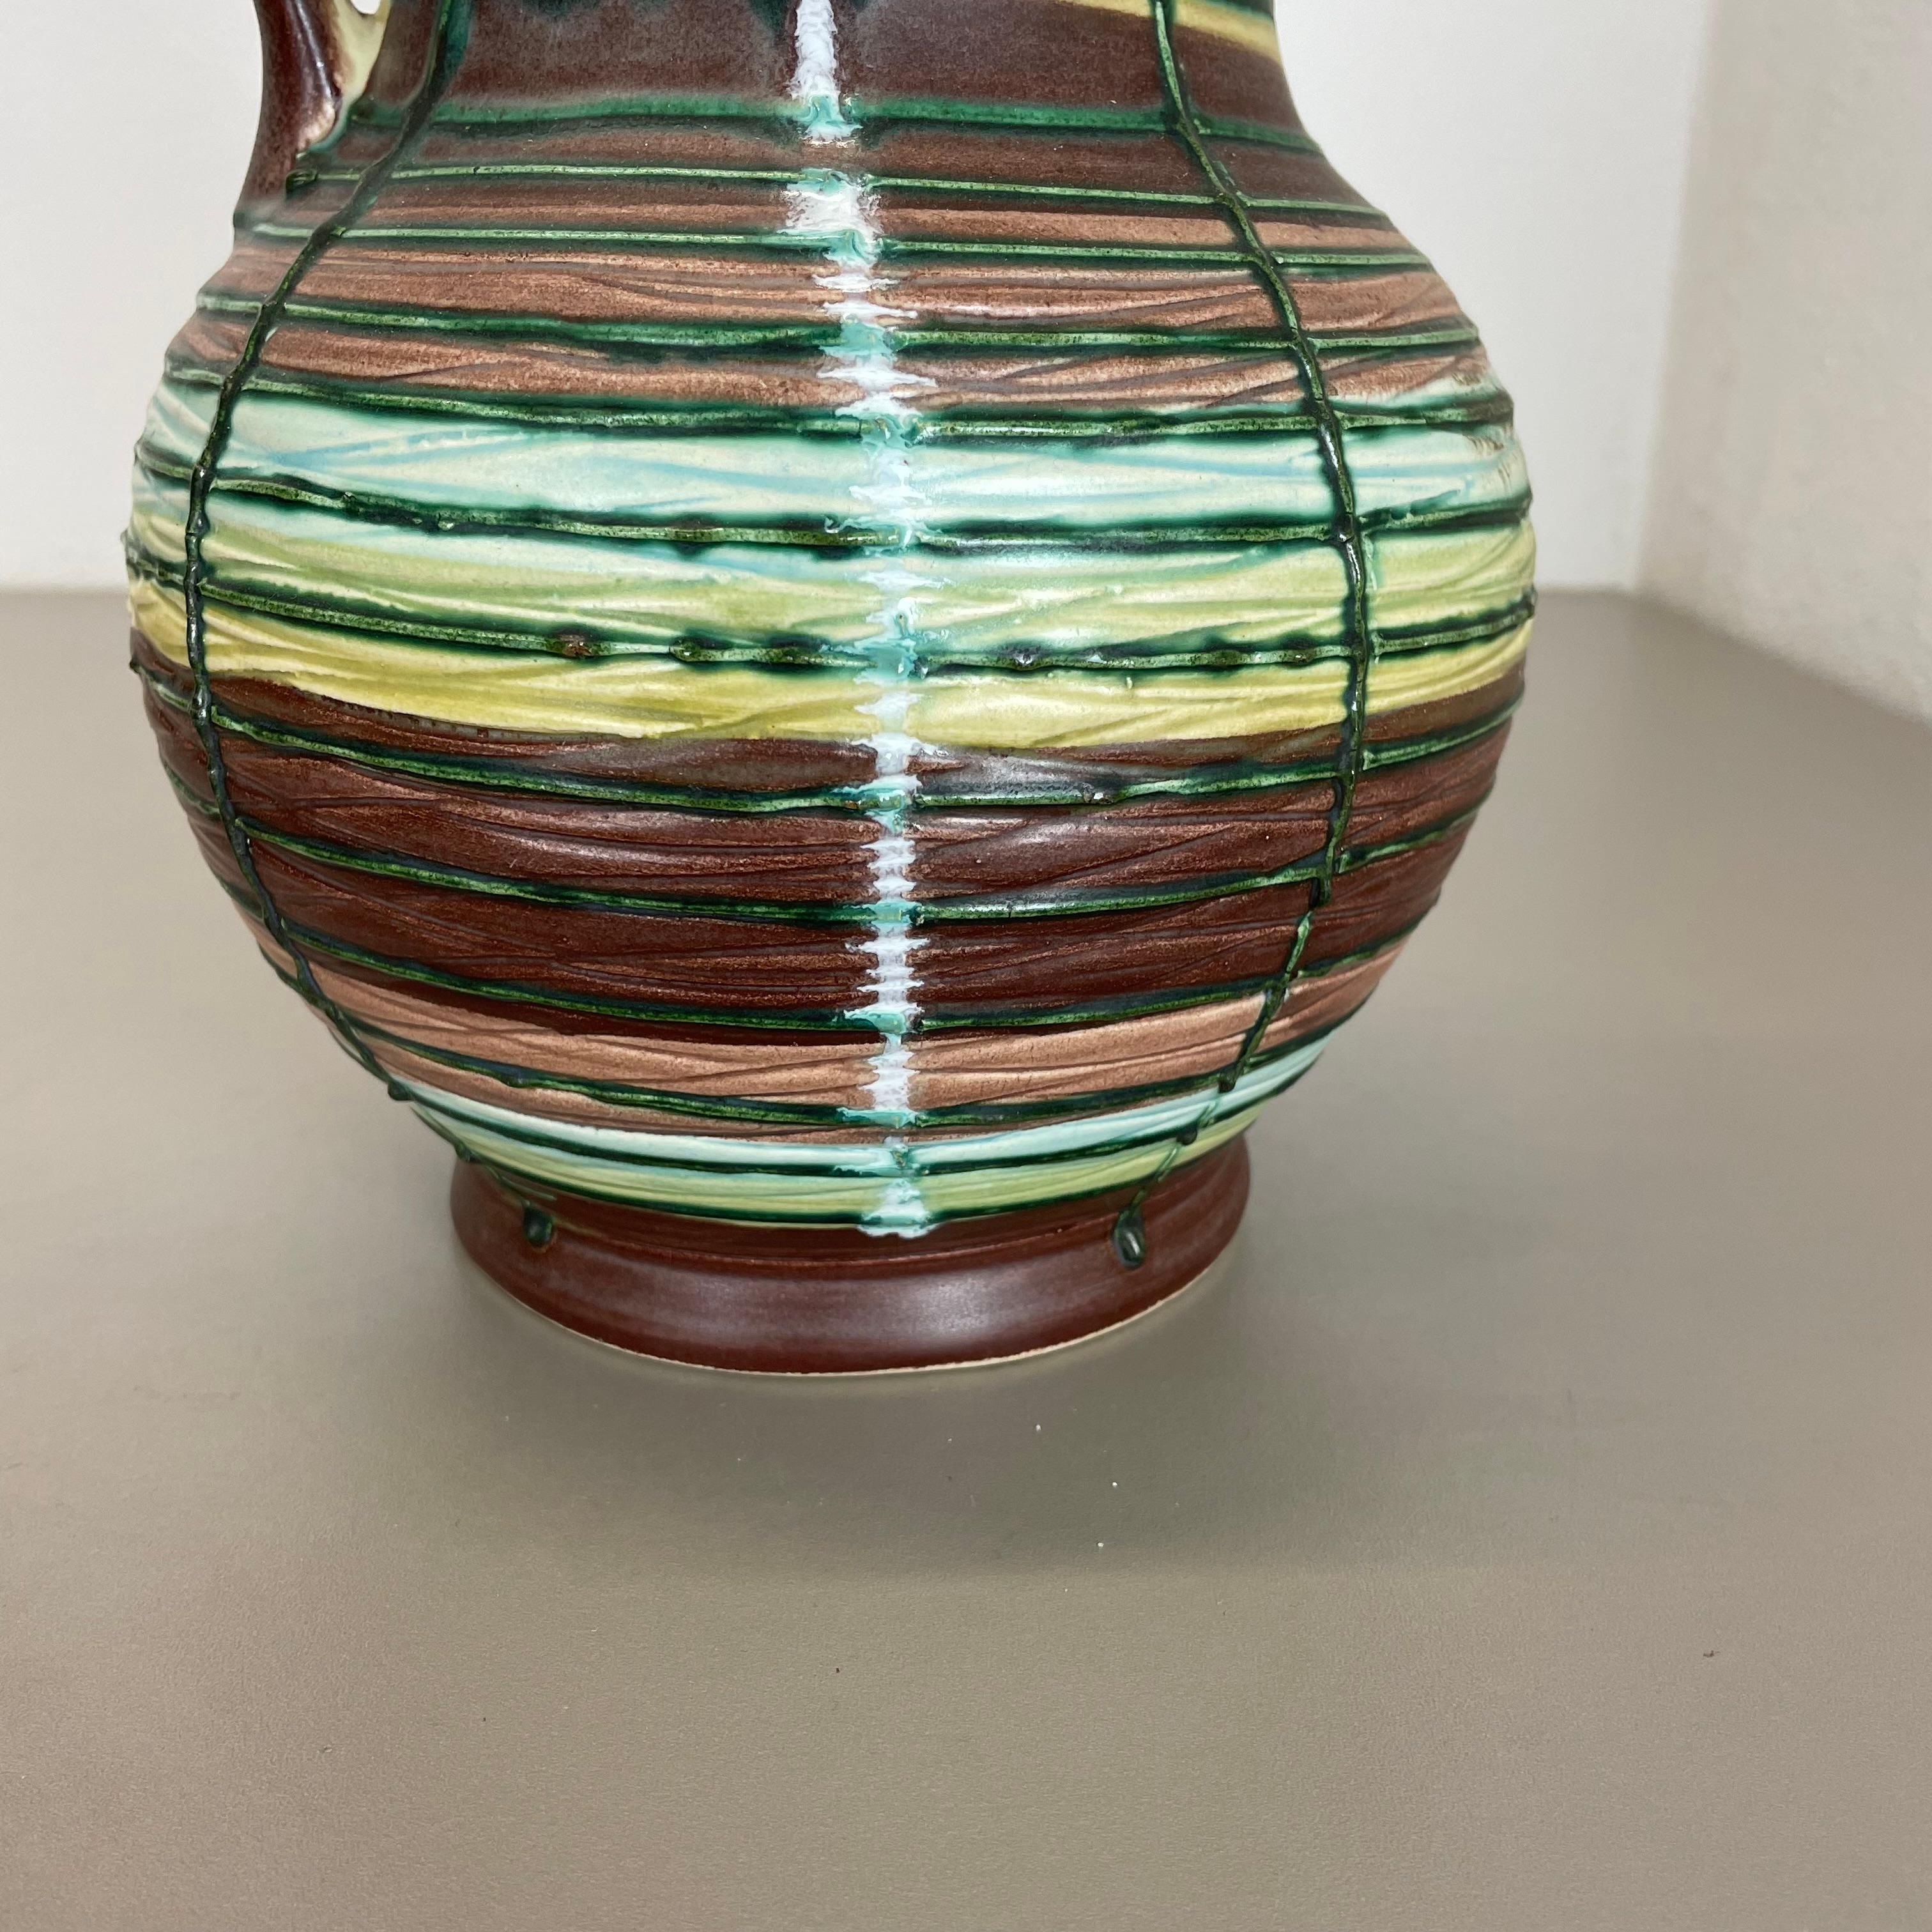 Super Colorful 31cm Fat Lava Pottery Vase by Bay Ceramics, Germany, 1970s For Sale 9